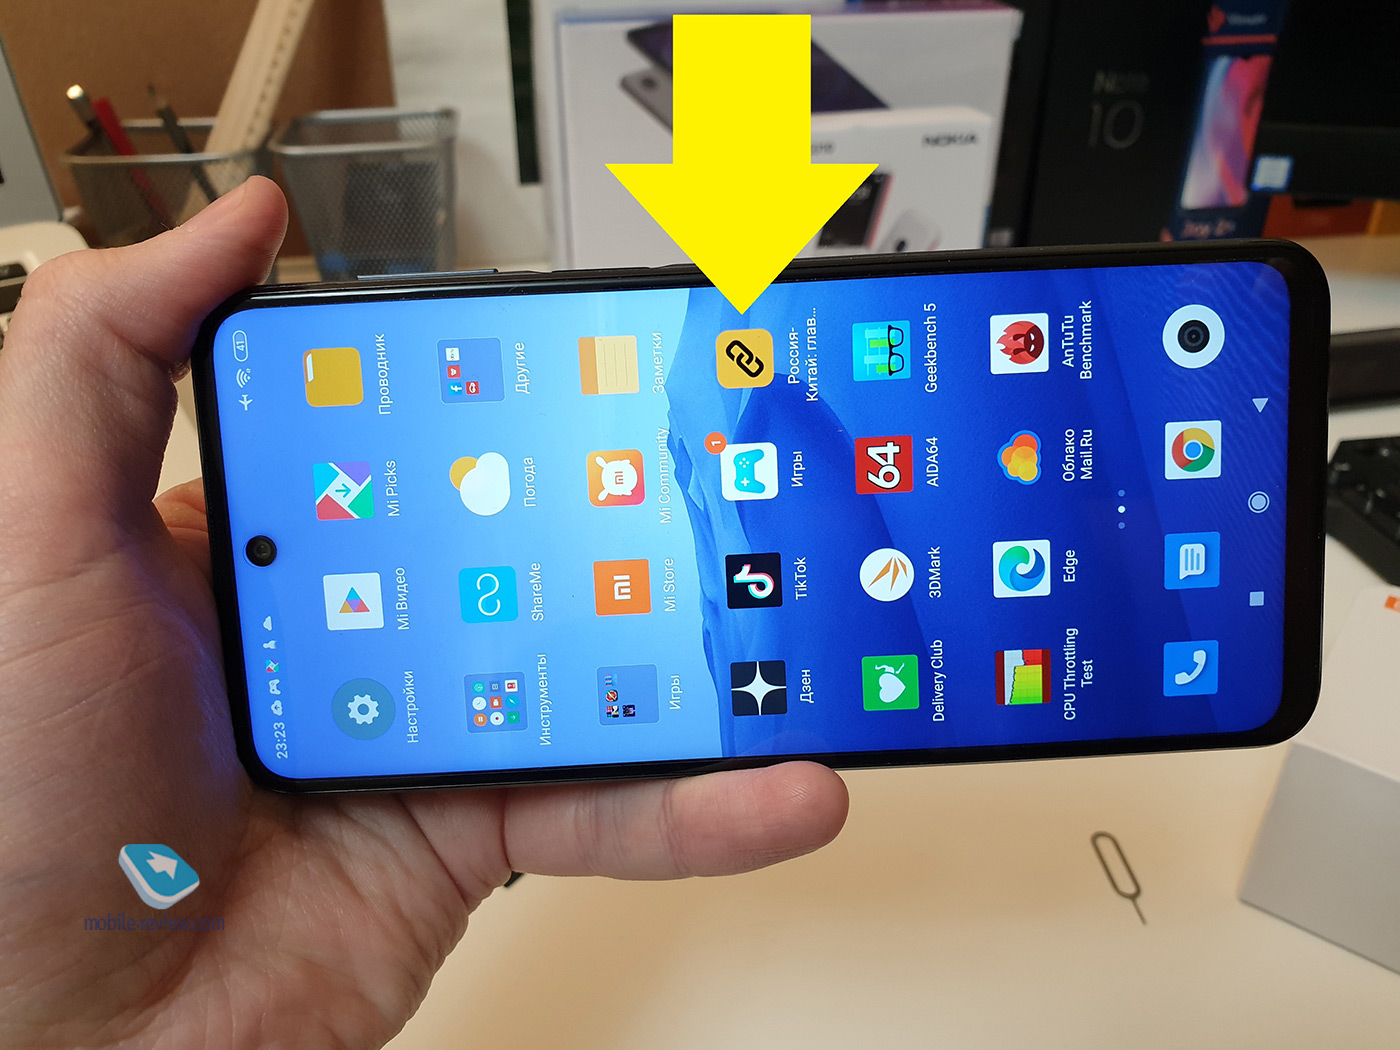 Xiaomi Redmi Note 9s review: do you know what's missing here?